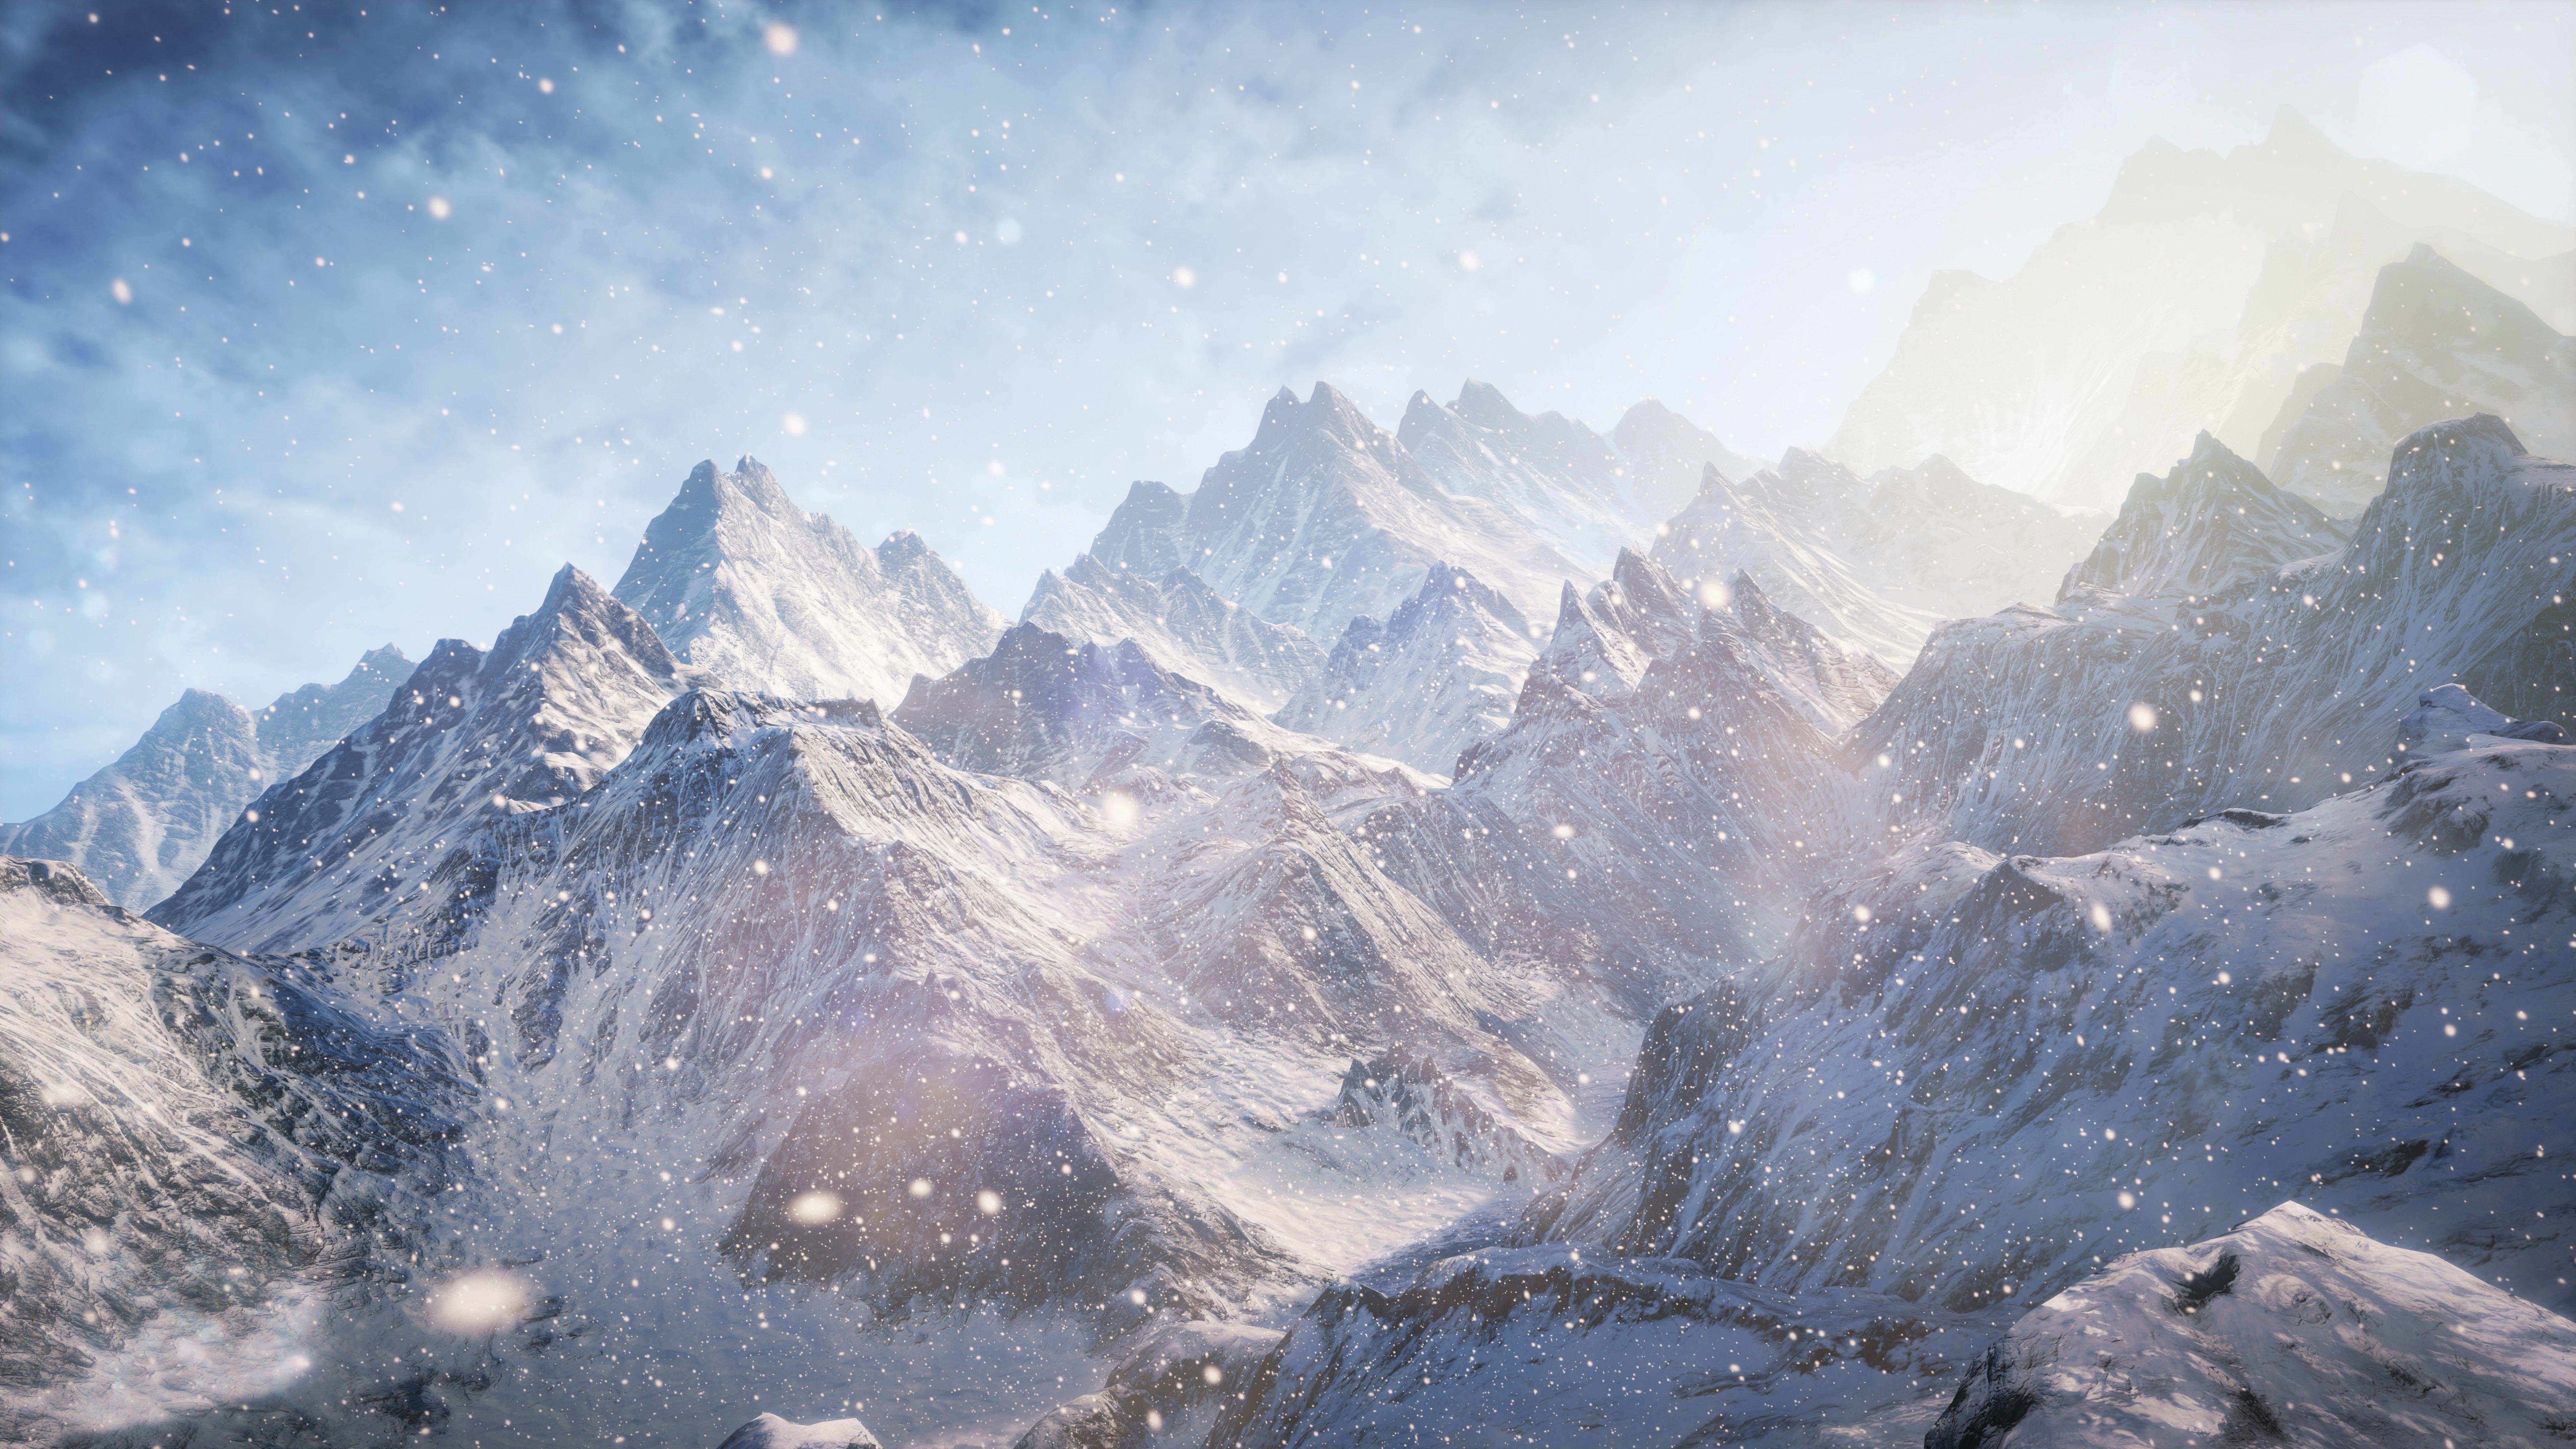 Snow Mountains 4k Wallpapers - Wallpaper Cave